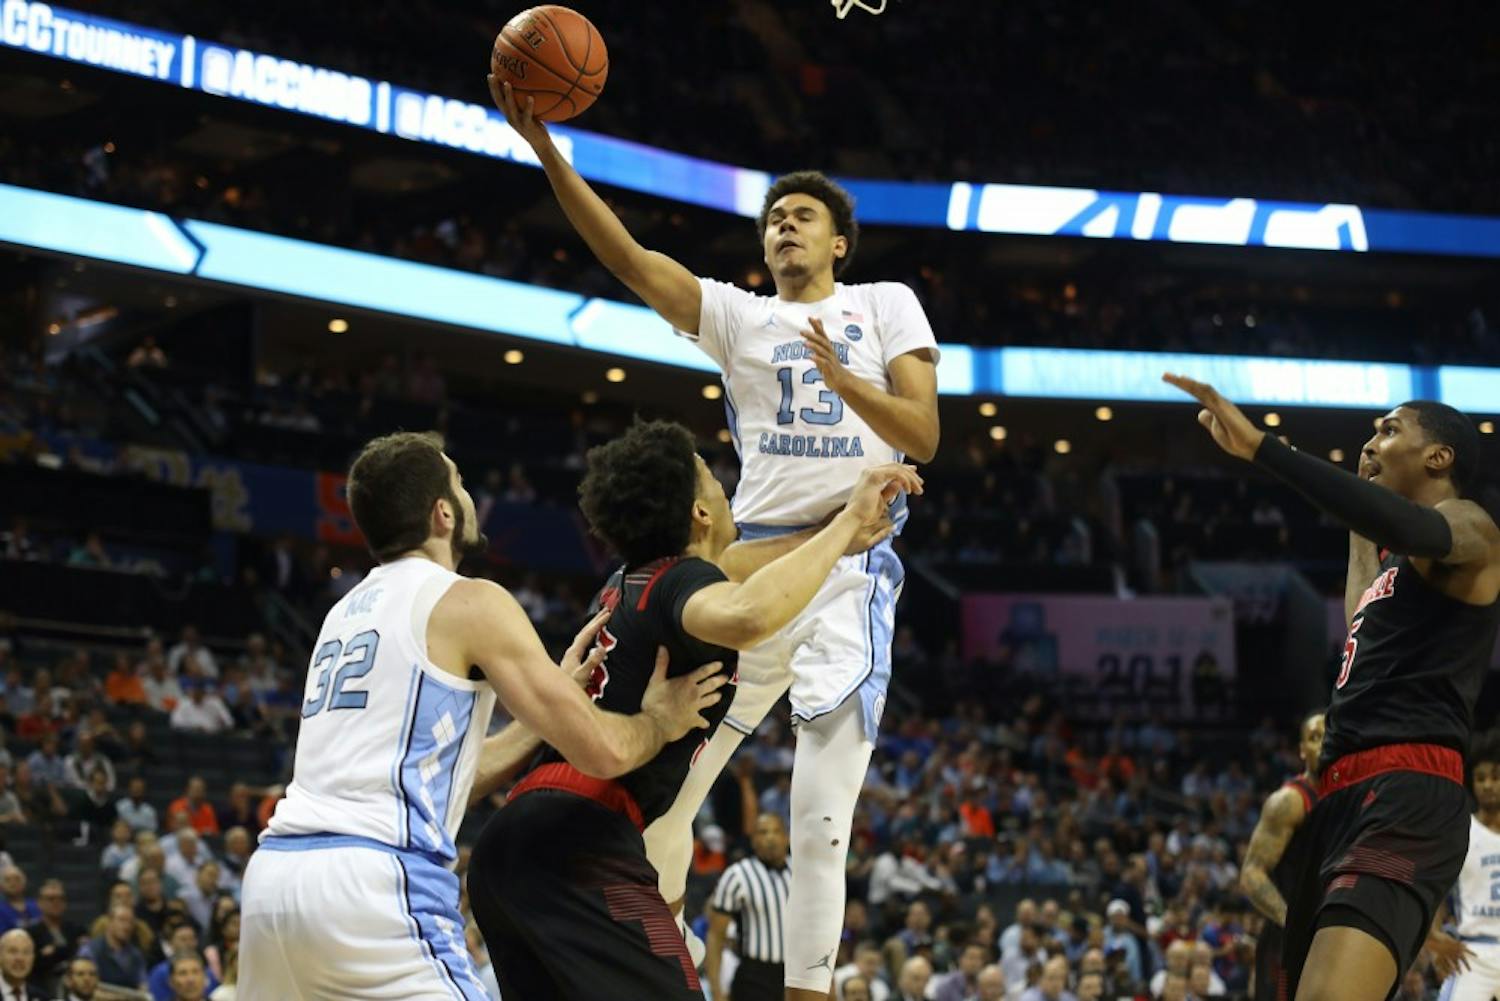 Graduate guard Cameron Johnson attempts a layup in the first half against Louisville in the ACC Tournament quarterfinals at the Spectrum Center in Charlotte.